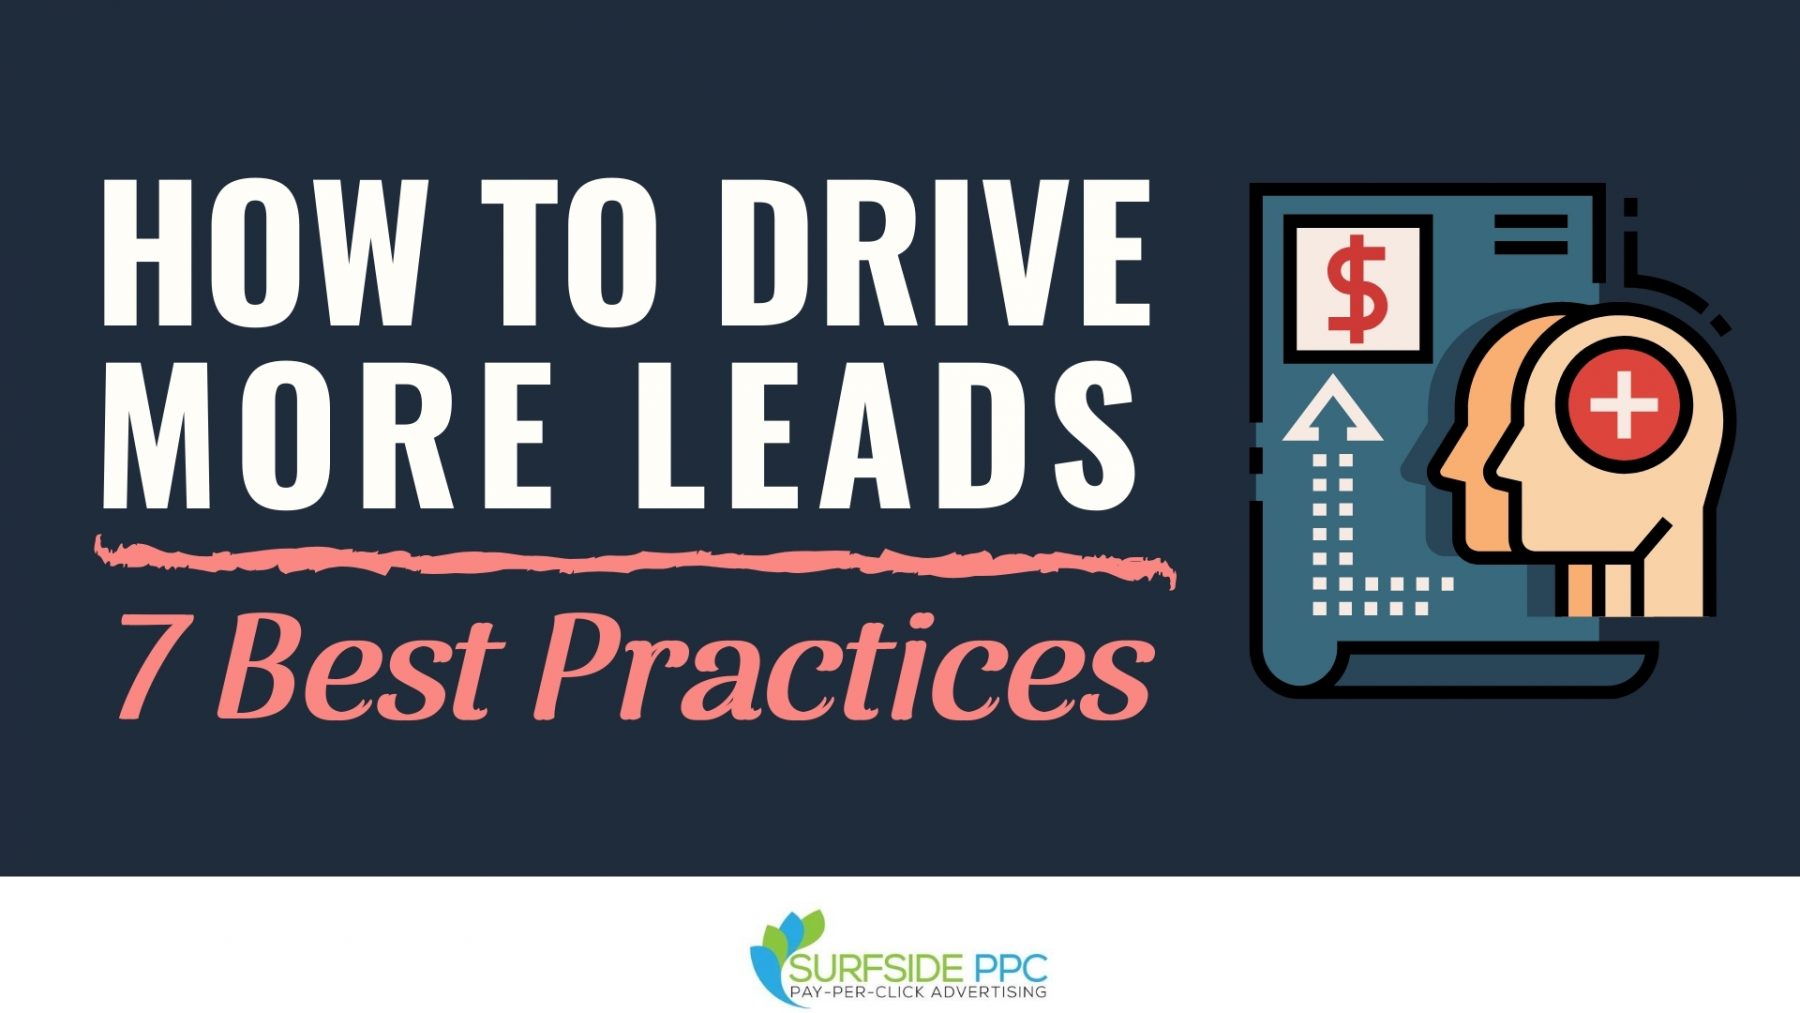 how to drive leads lead generation